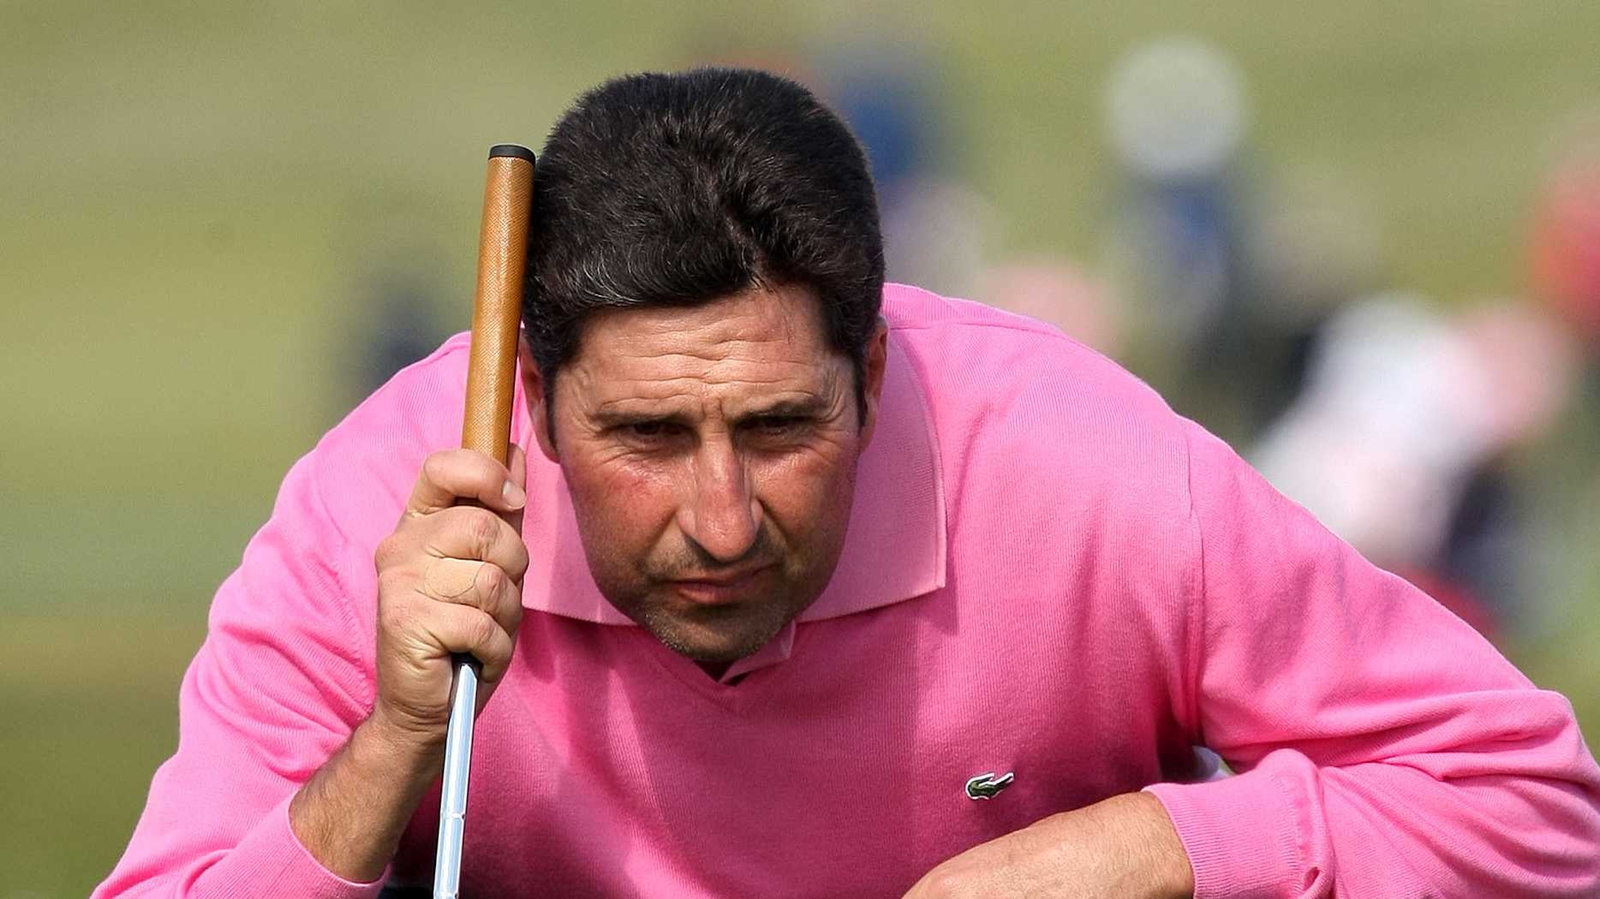 Olazabal knows how tough America is